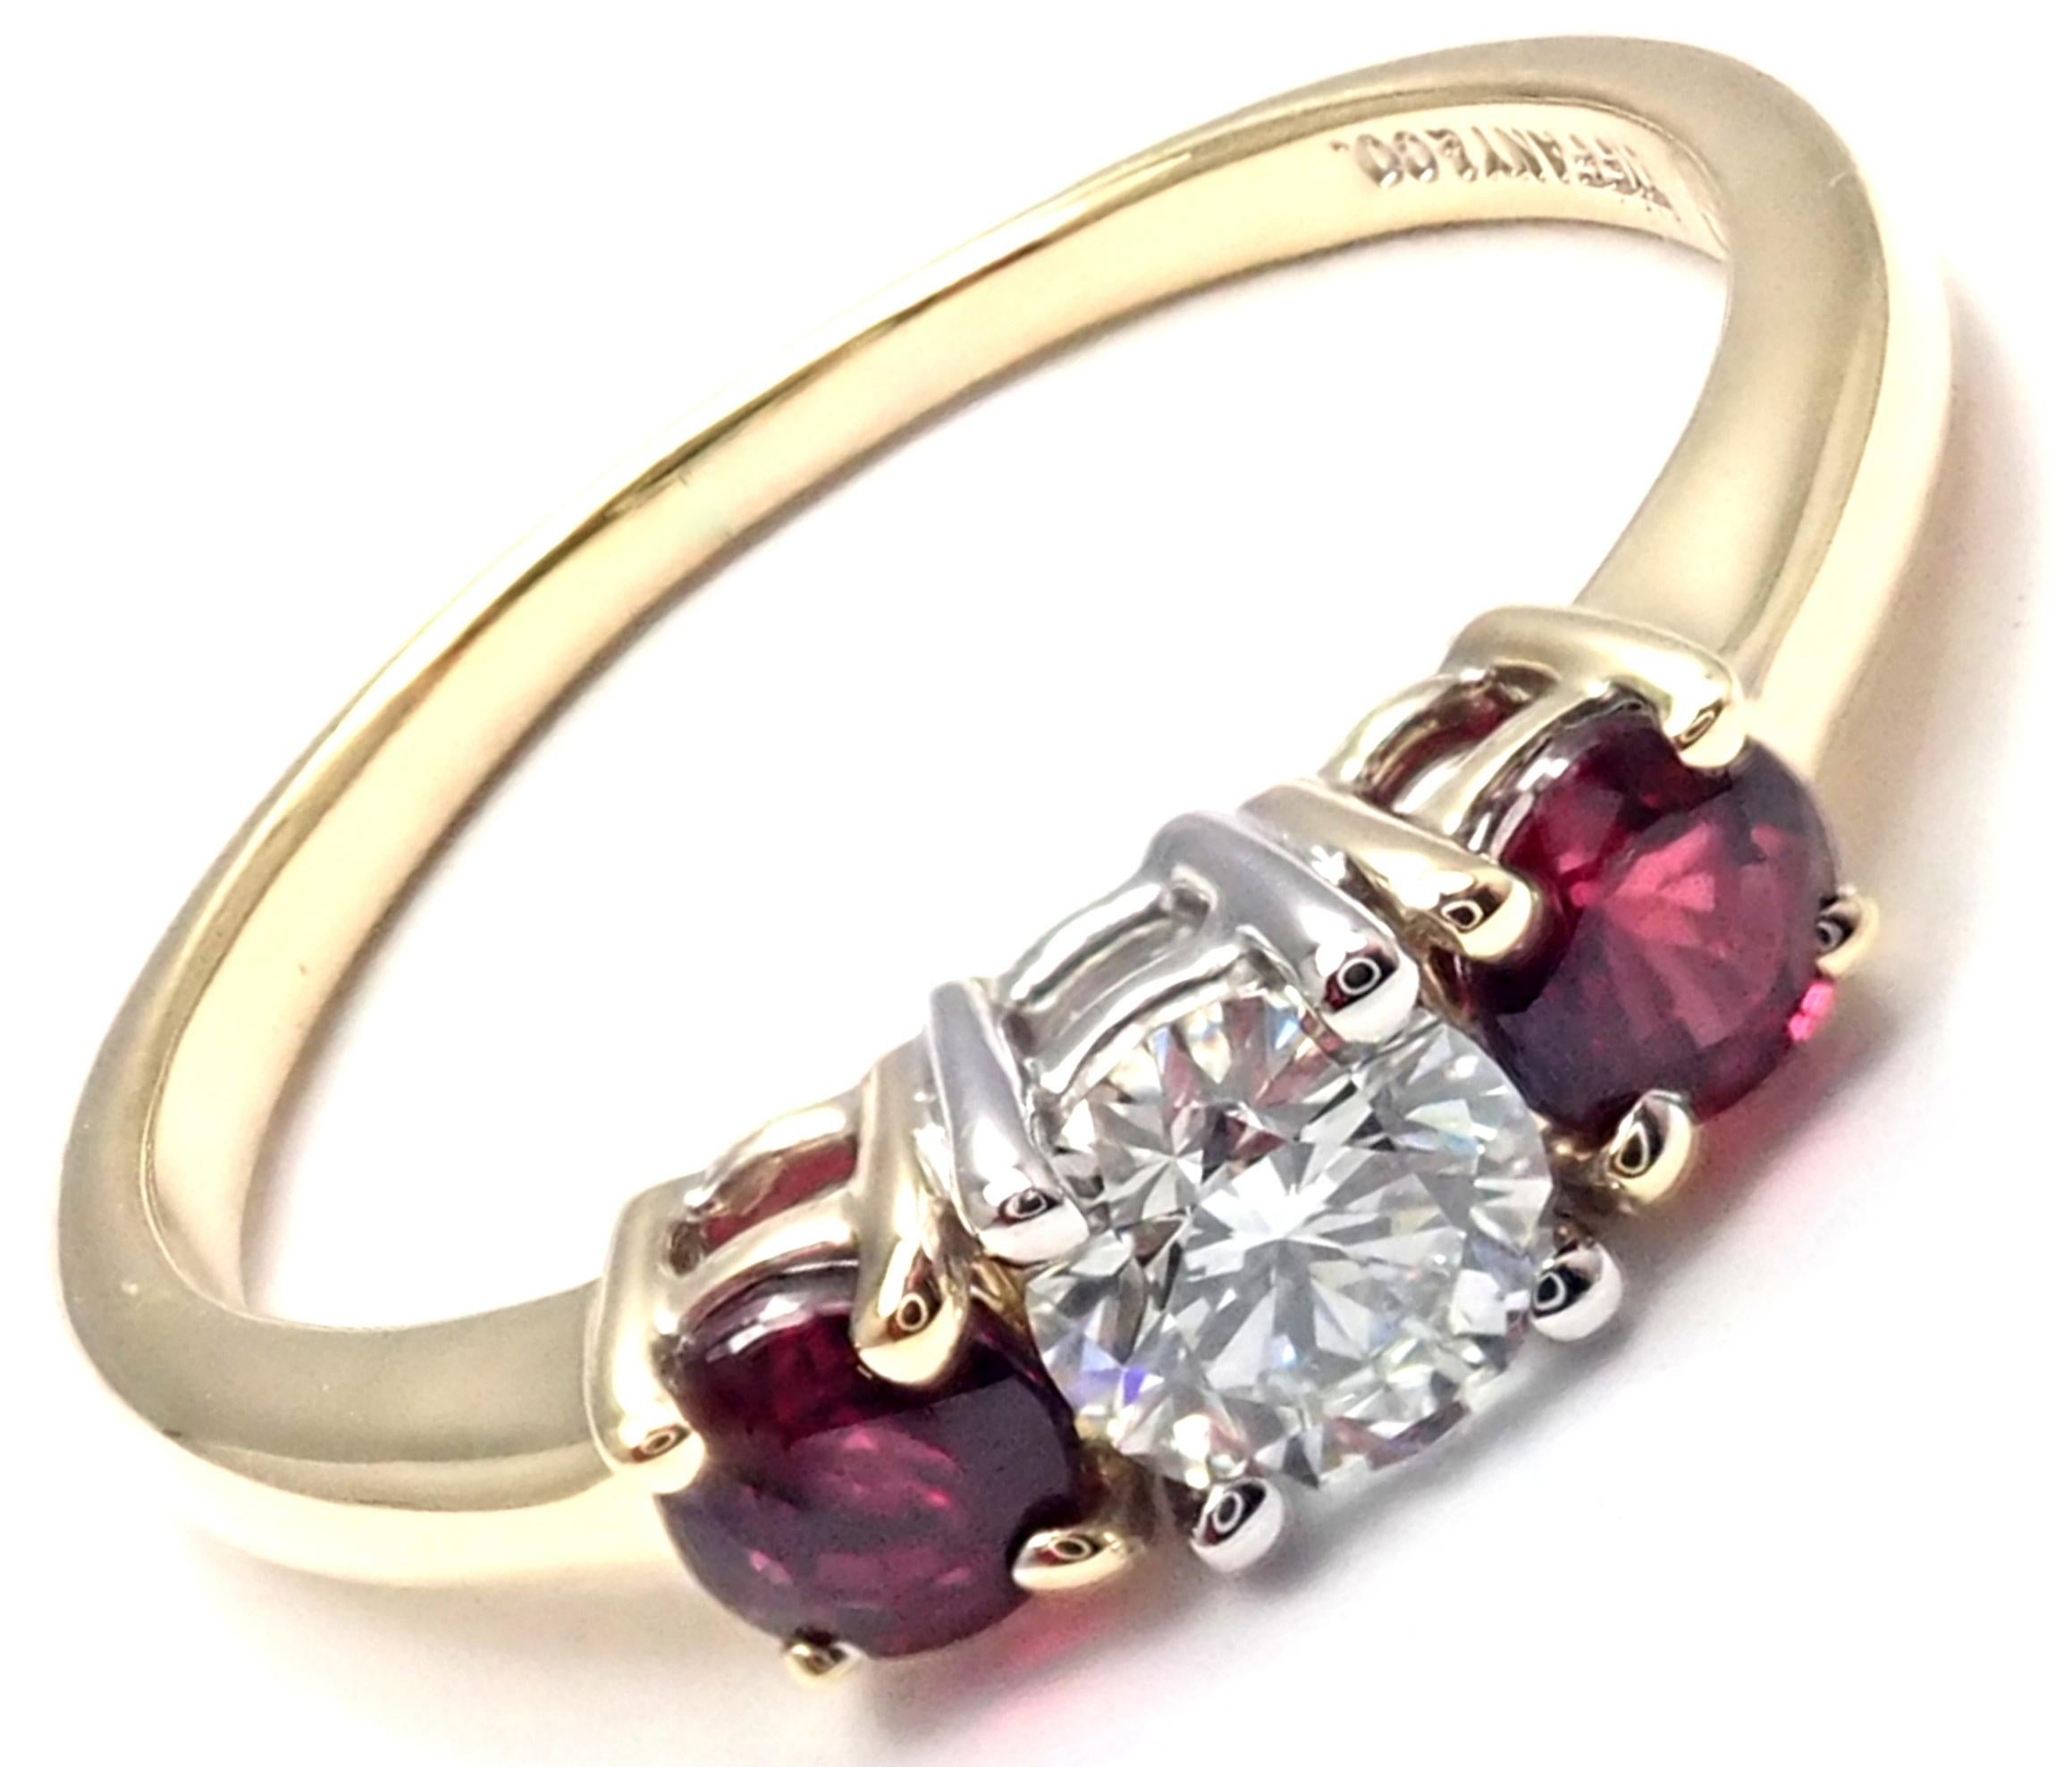 18k Yellow Gold and Platinum Diamond And Ruby Three Stone Band Ring by Tiffany & Co. 
With 1 Round Brilliant Cut Diamond VS1 clarity, G color, Total weight Approx .50ctw
2 Round rubies total weight approx.  0.50ct
Details:
Ring Size: 6
Width: